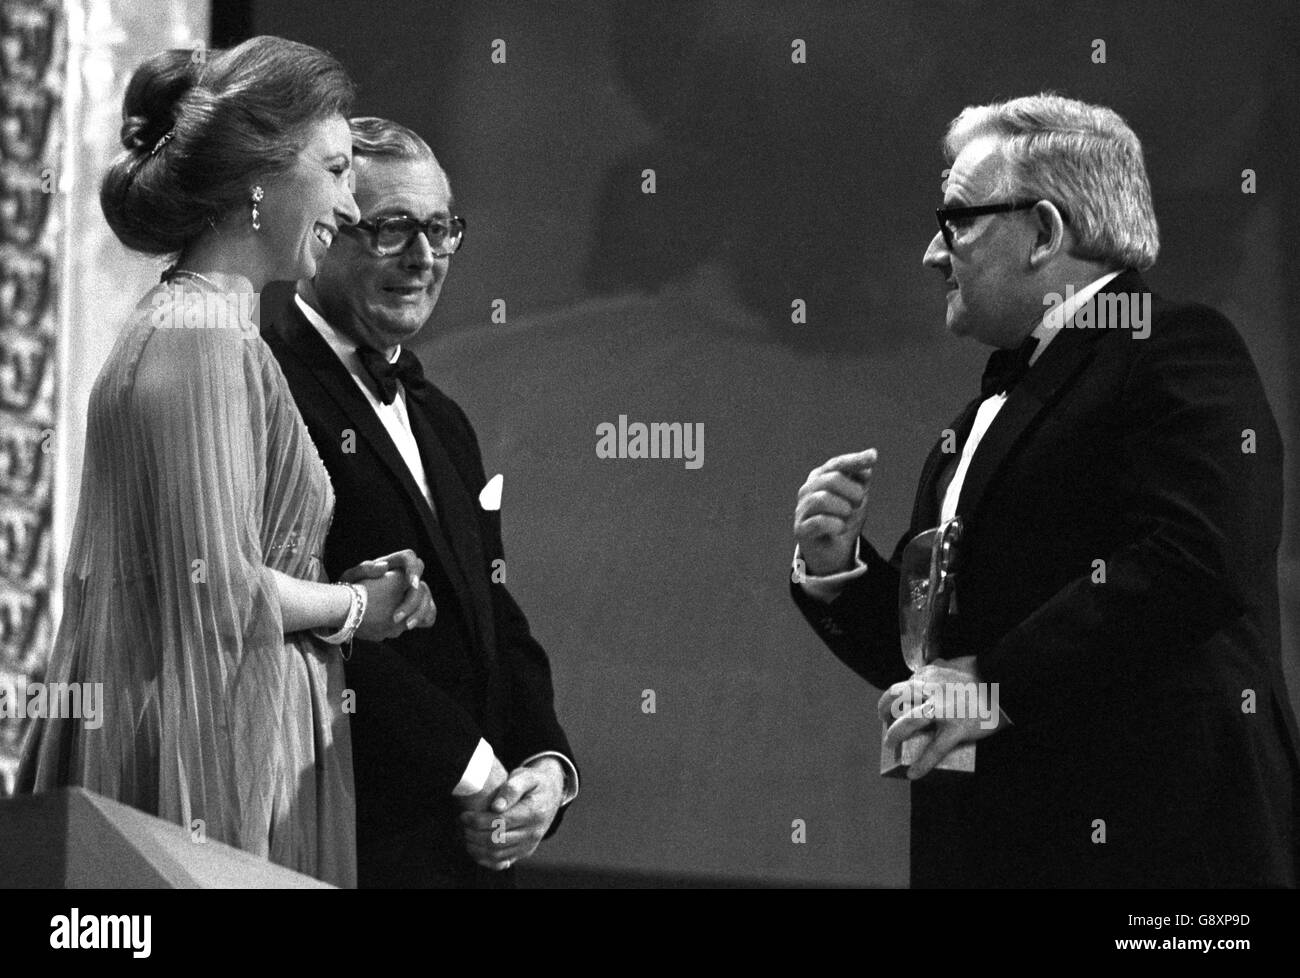 Princess Anne, President of the British Academy of Film and Television Arts, is tickled by the remarks of comedian Ronnie Barker after she had presented him with the award for Best Light Entertainment Performance during the Academy's 1977 awards ceremony at the Wembley Conference Centre. Stock Photo